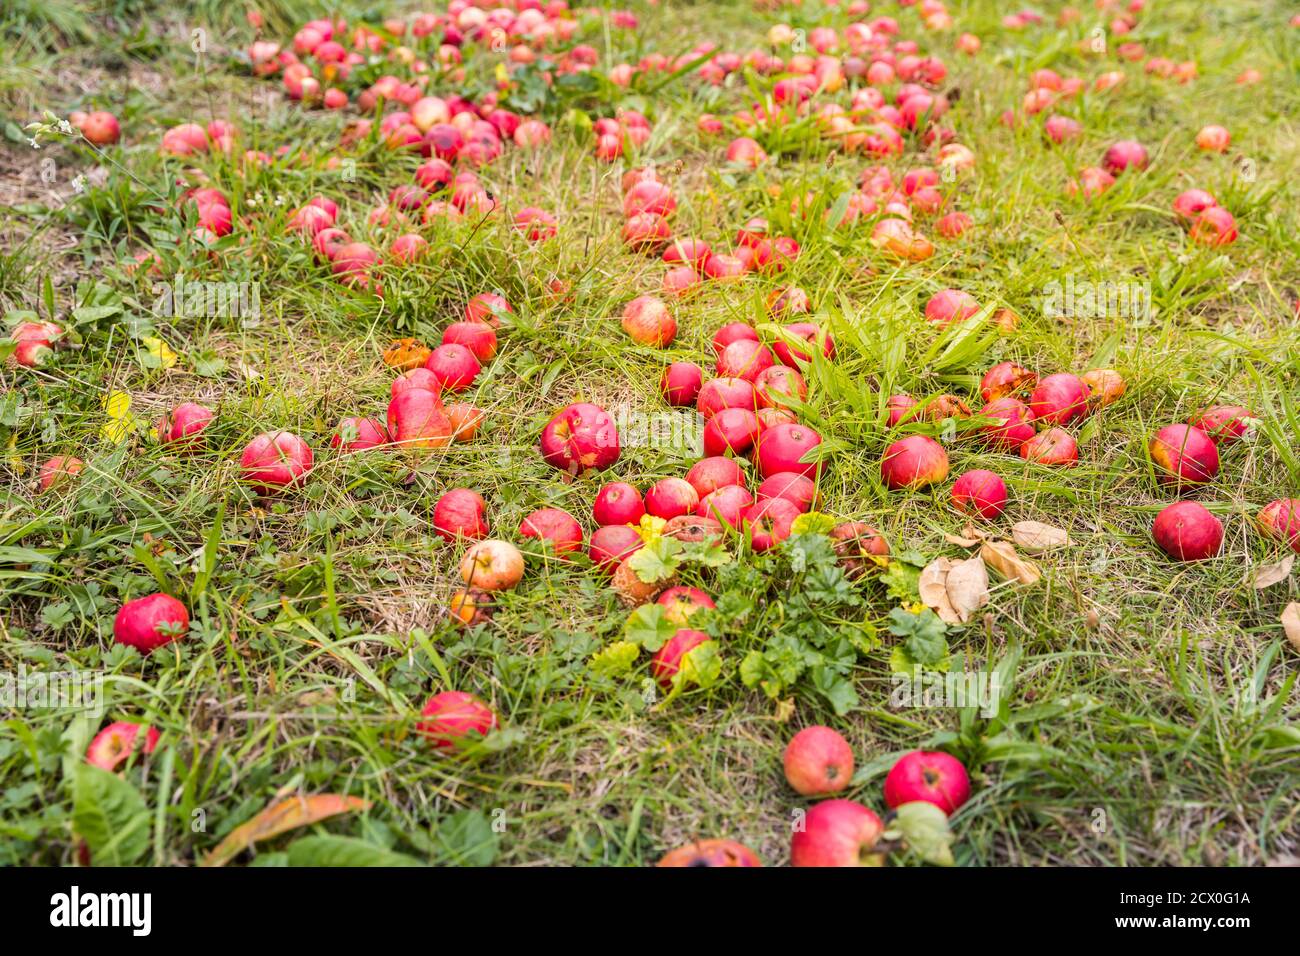 Fallen red apples on ground. Autumn, harvest, natural background. Selective focus. Stock Photo